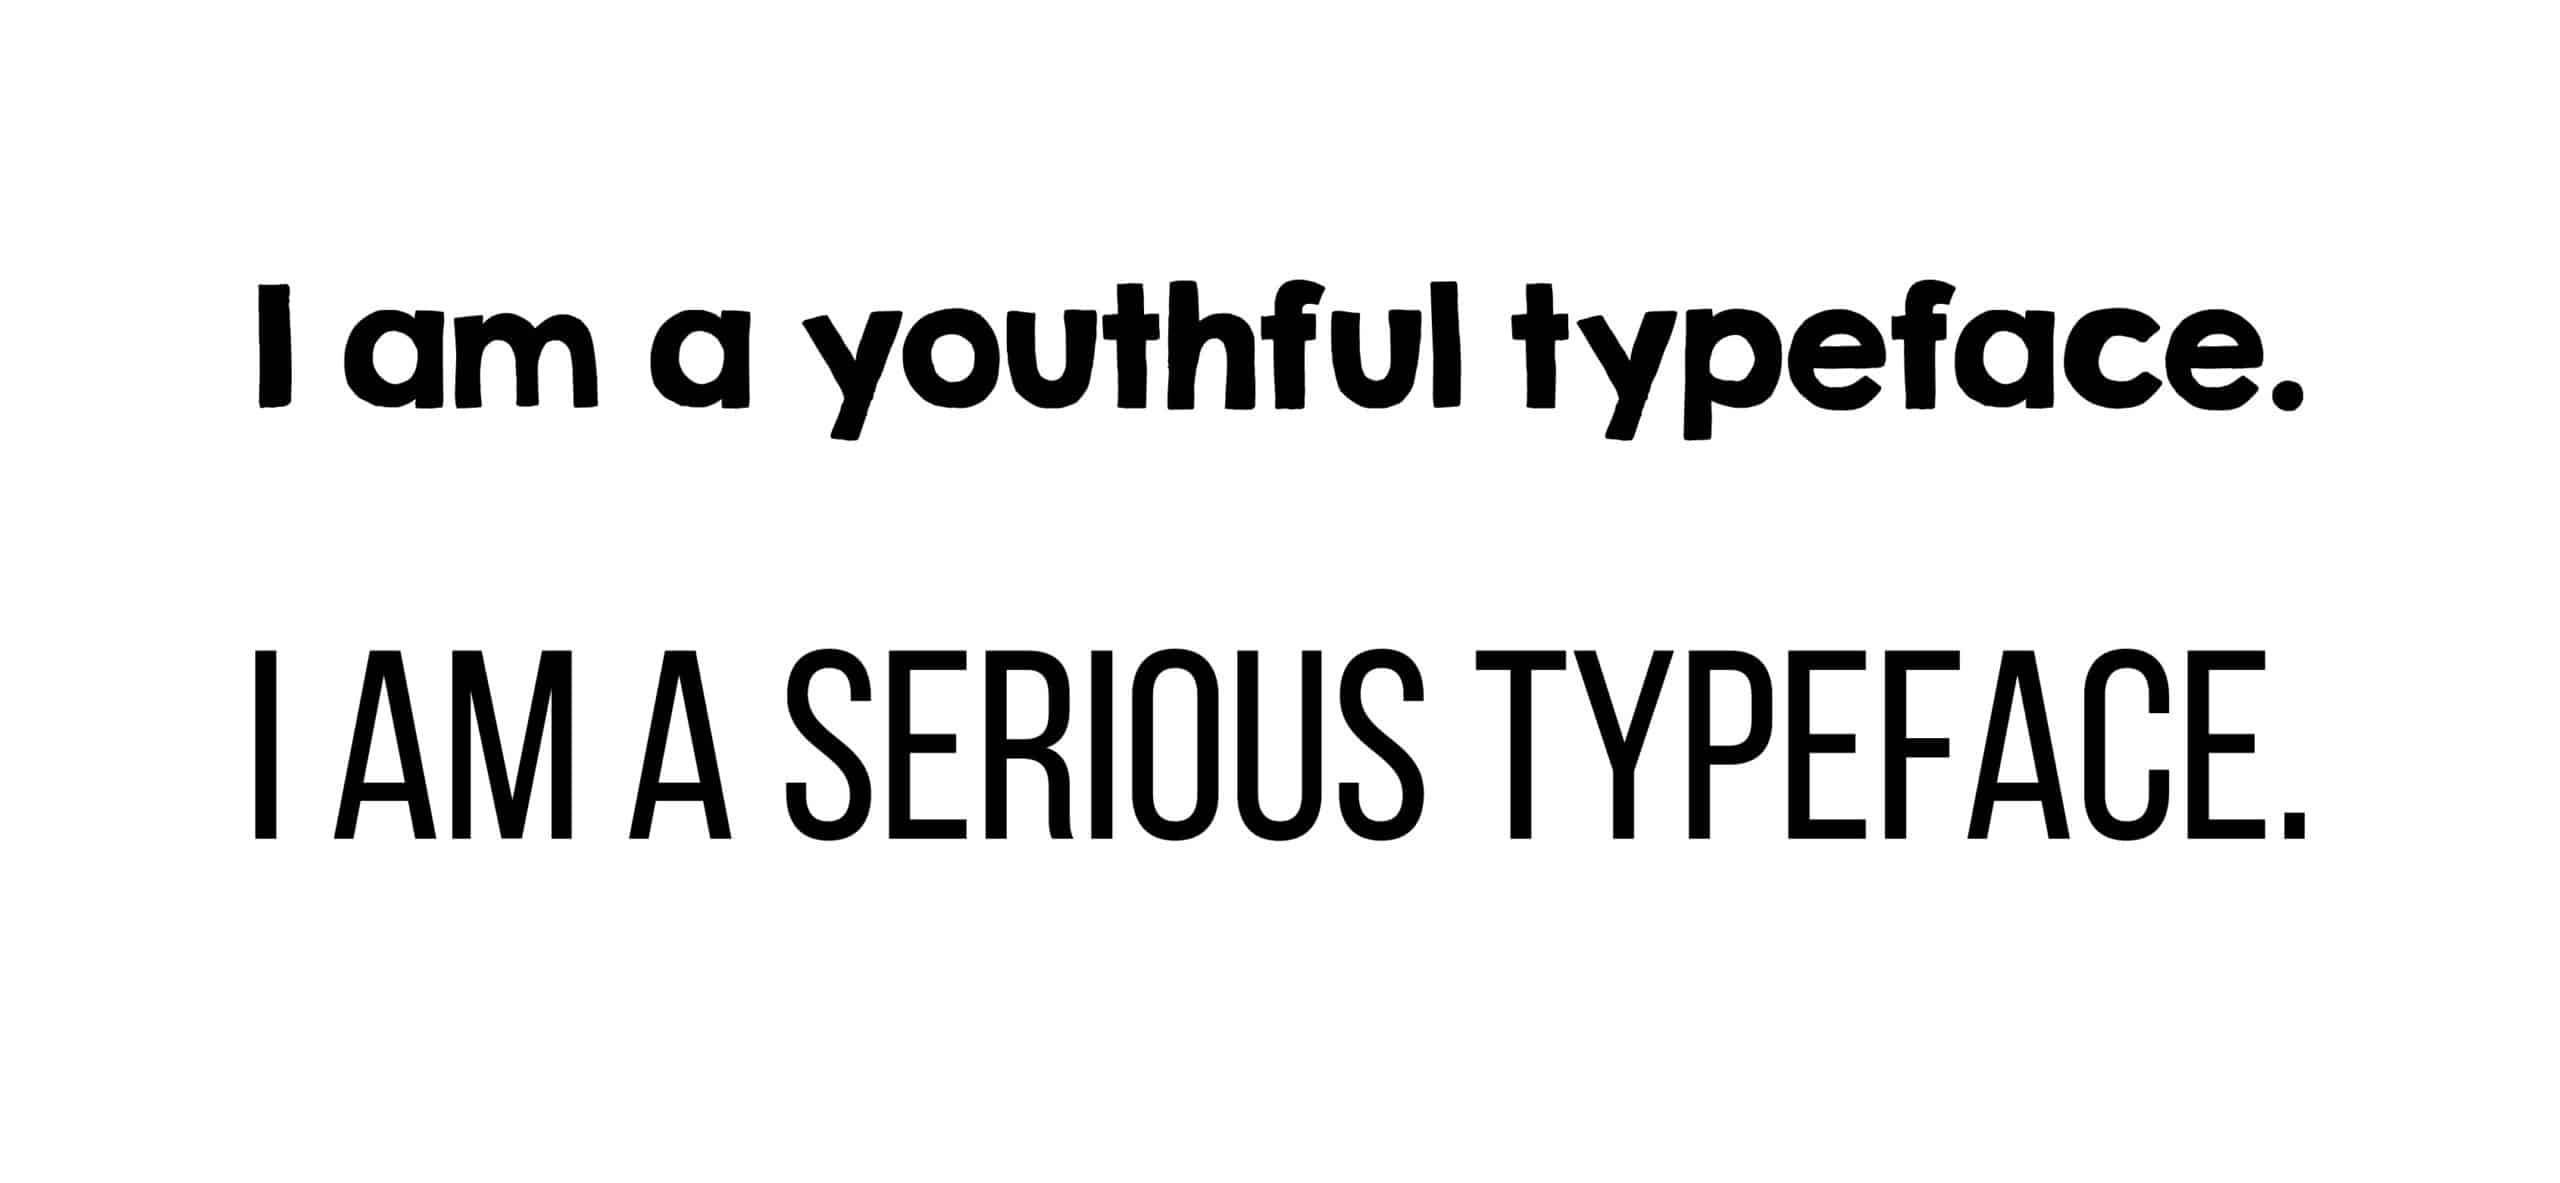 Youthful vs. Serious Typeface Example